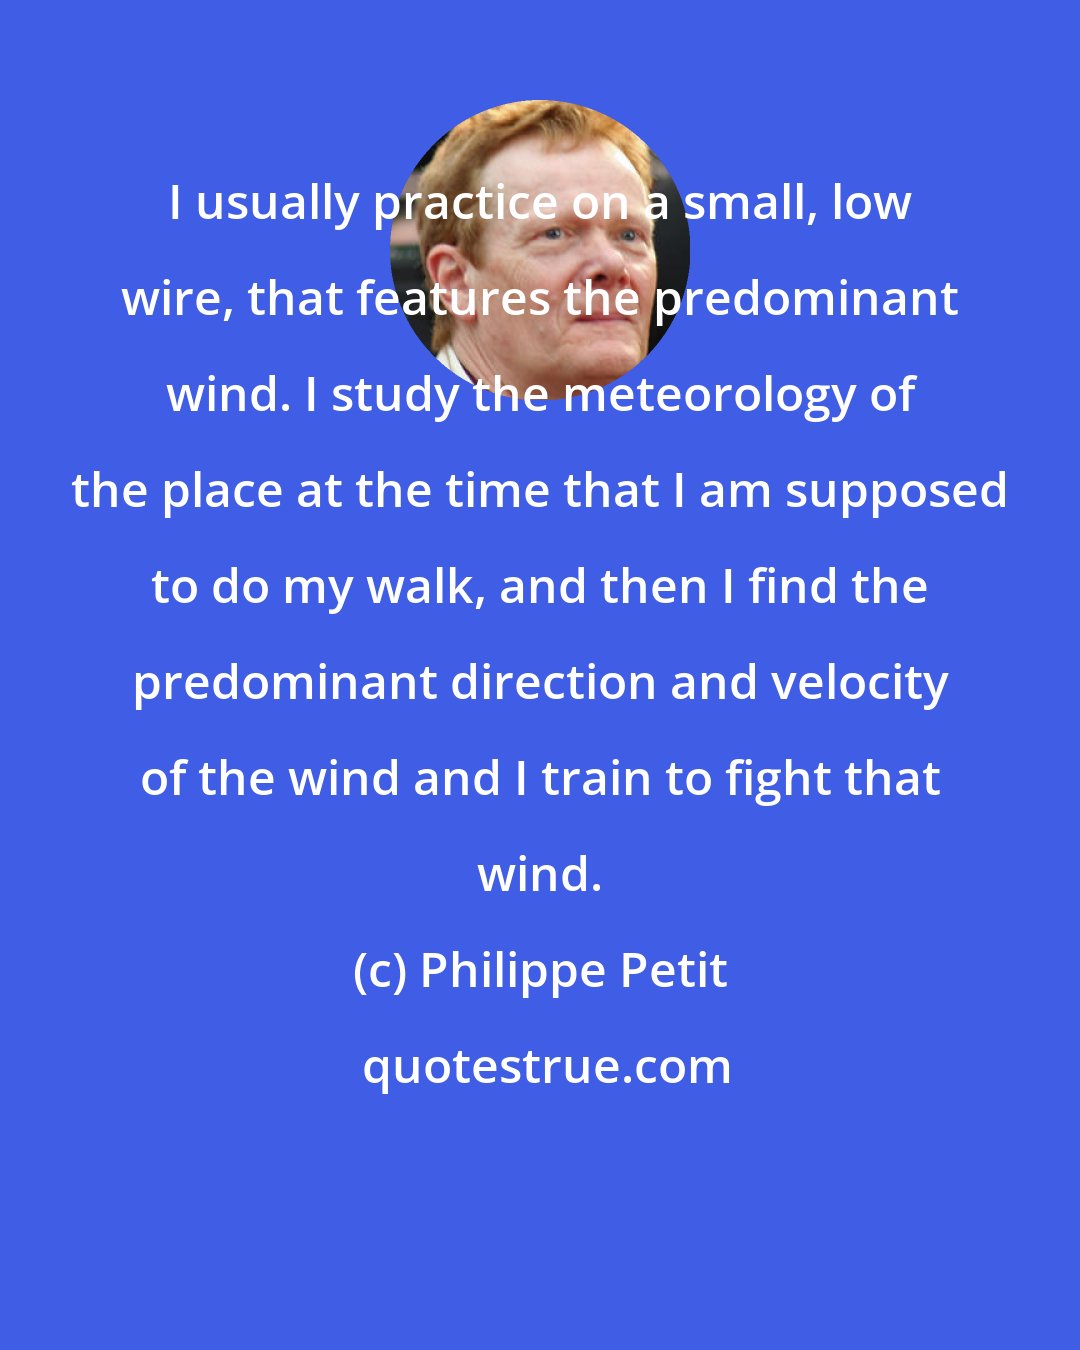 Philippe Petit: I usually practice on a small, low wire, that features the predominant wind. I study the meteorology of the place at the time that I am supposed to do my walk, and then I find the predominant direction and velocity of the wind and I train to fight that wind.